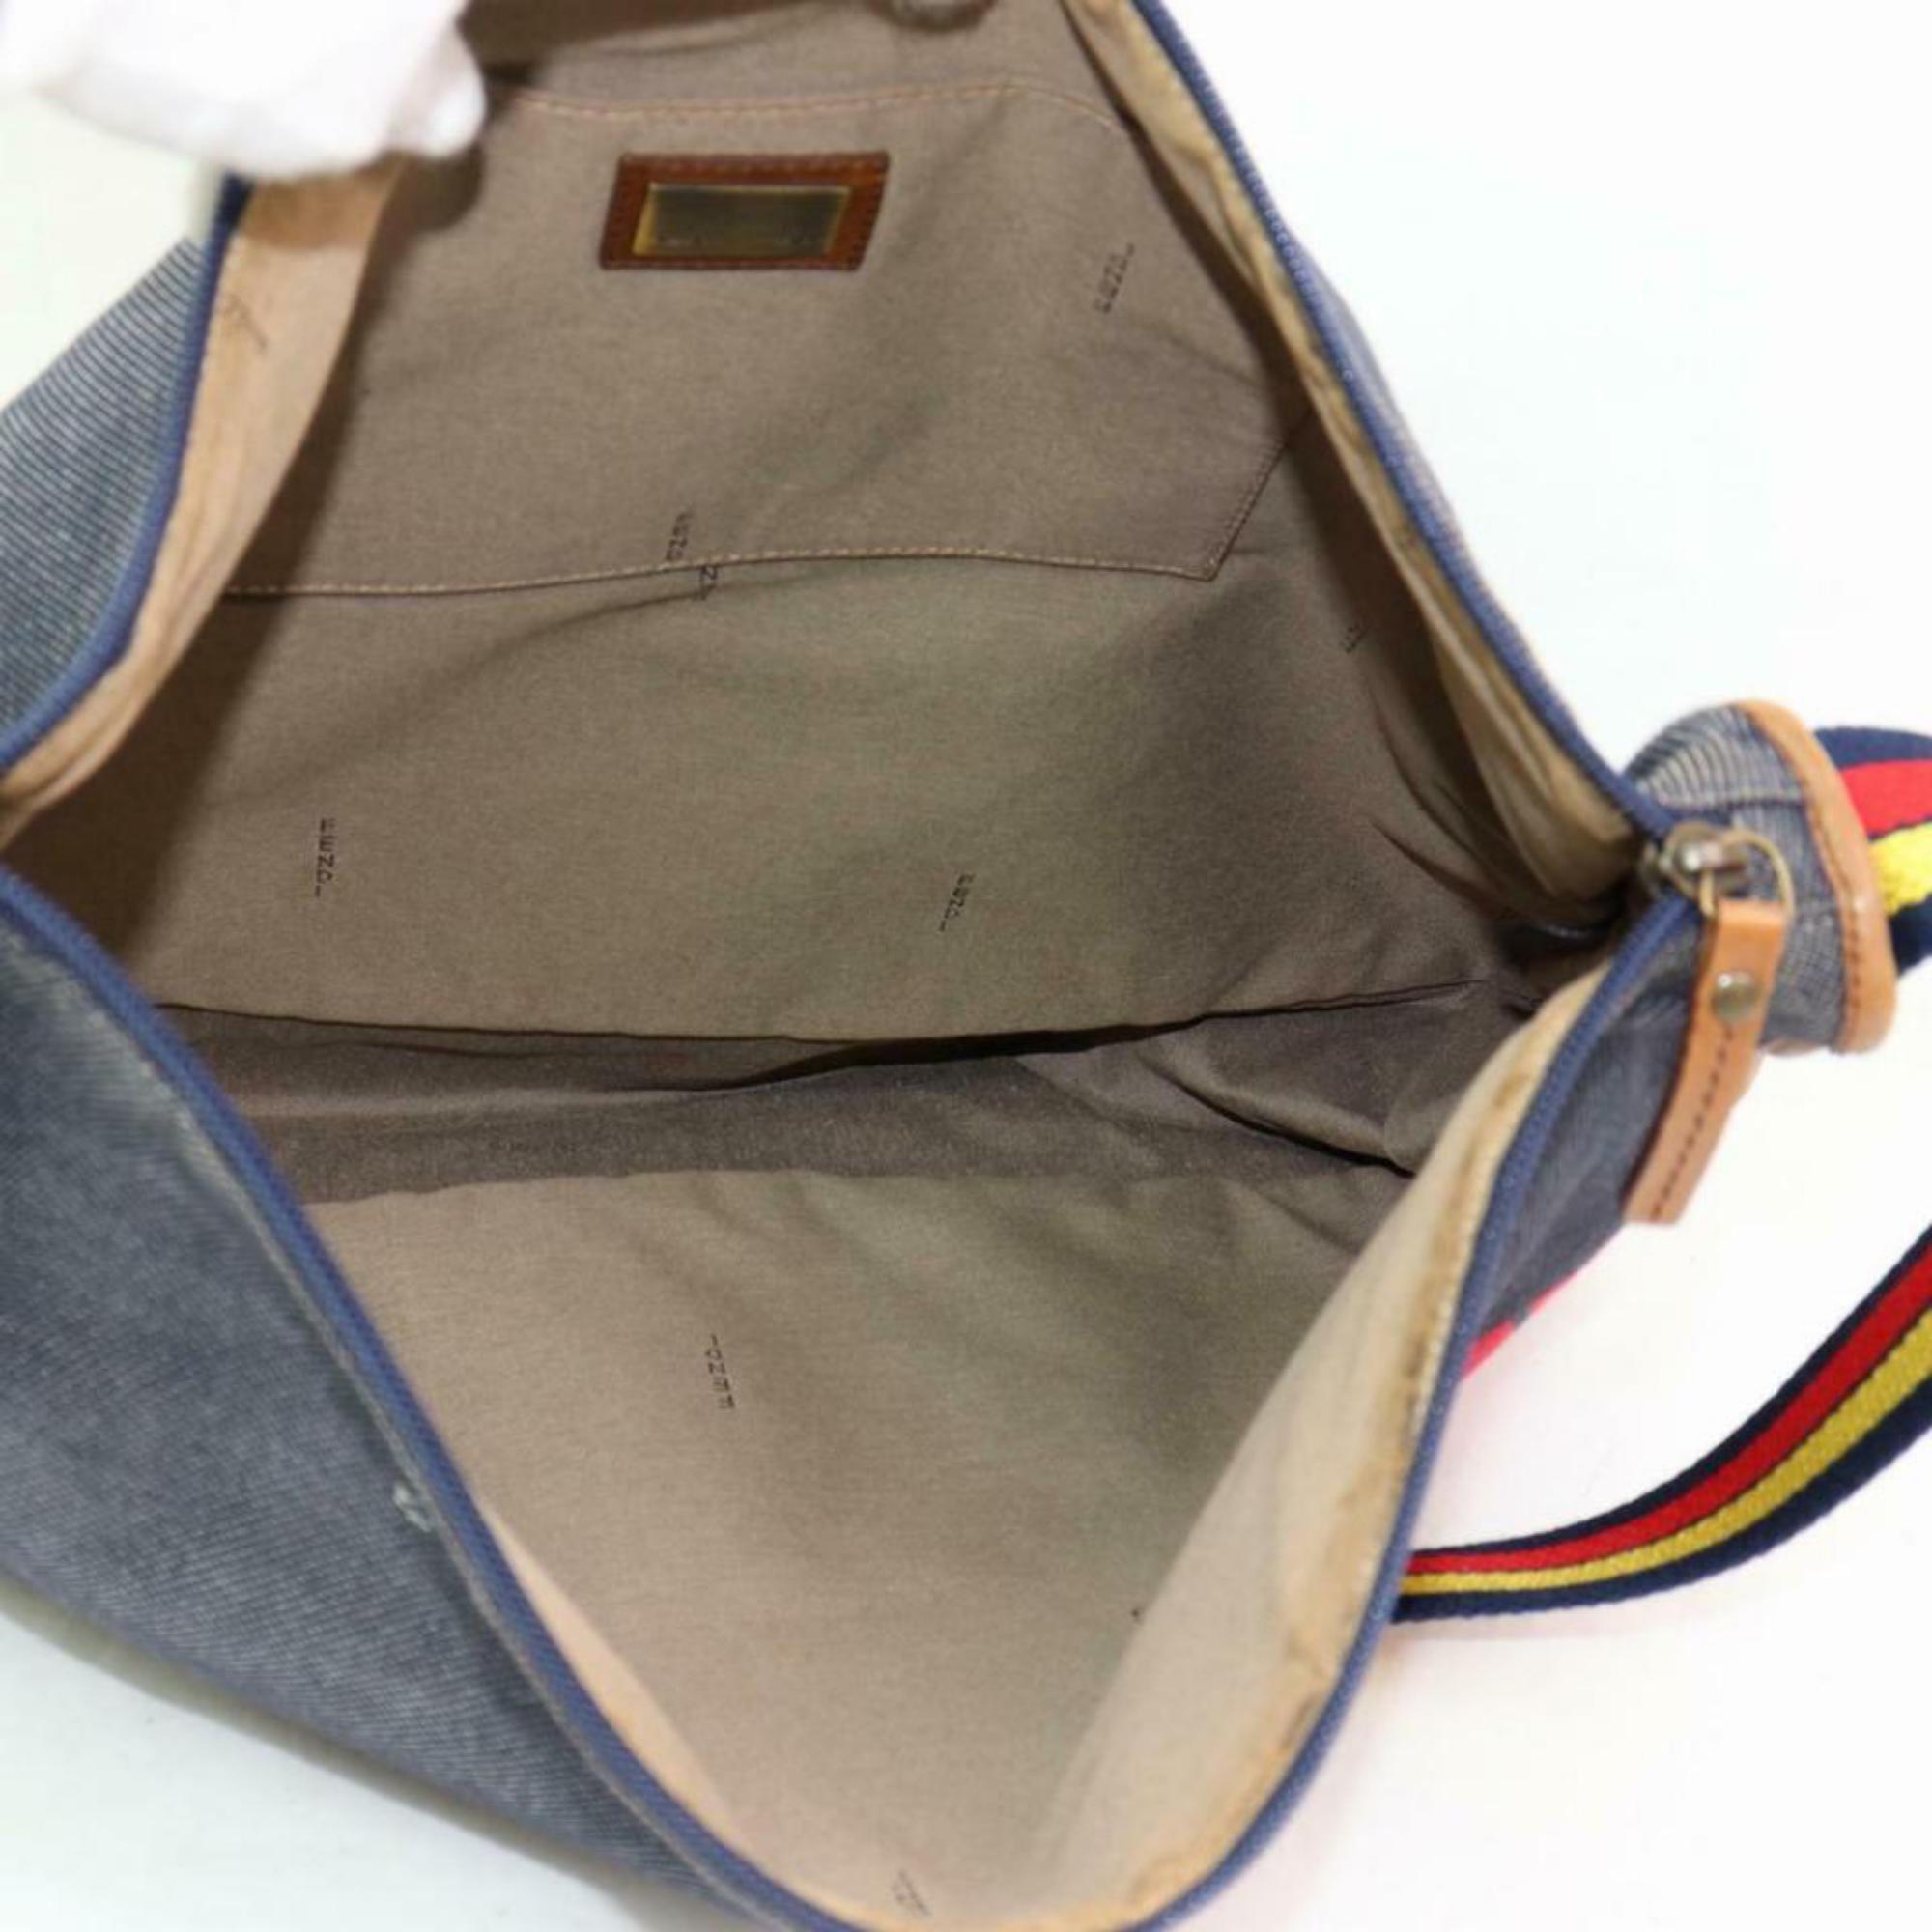 Fendi Ultra Logo Rainbow Messenger 870153 Blue Denim Cross Body Bag In Good Condition For Sale In Forest Hills, NY